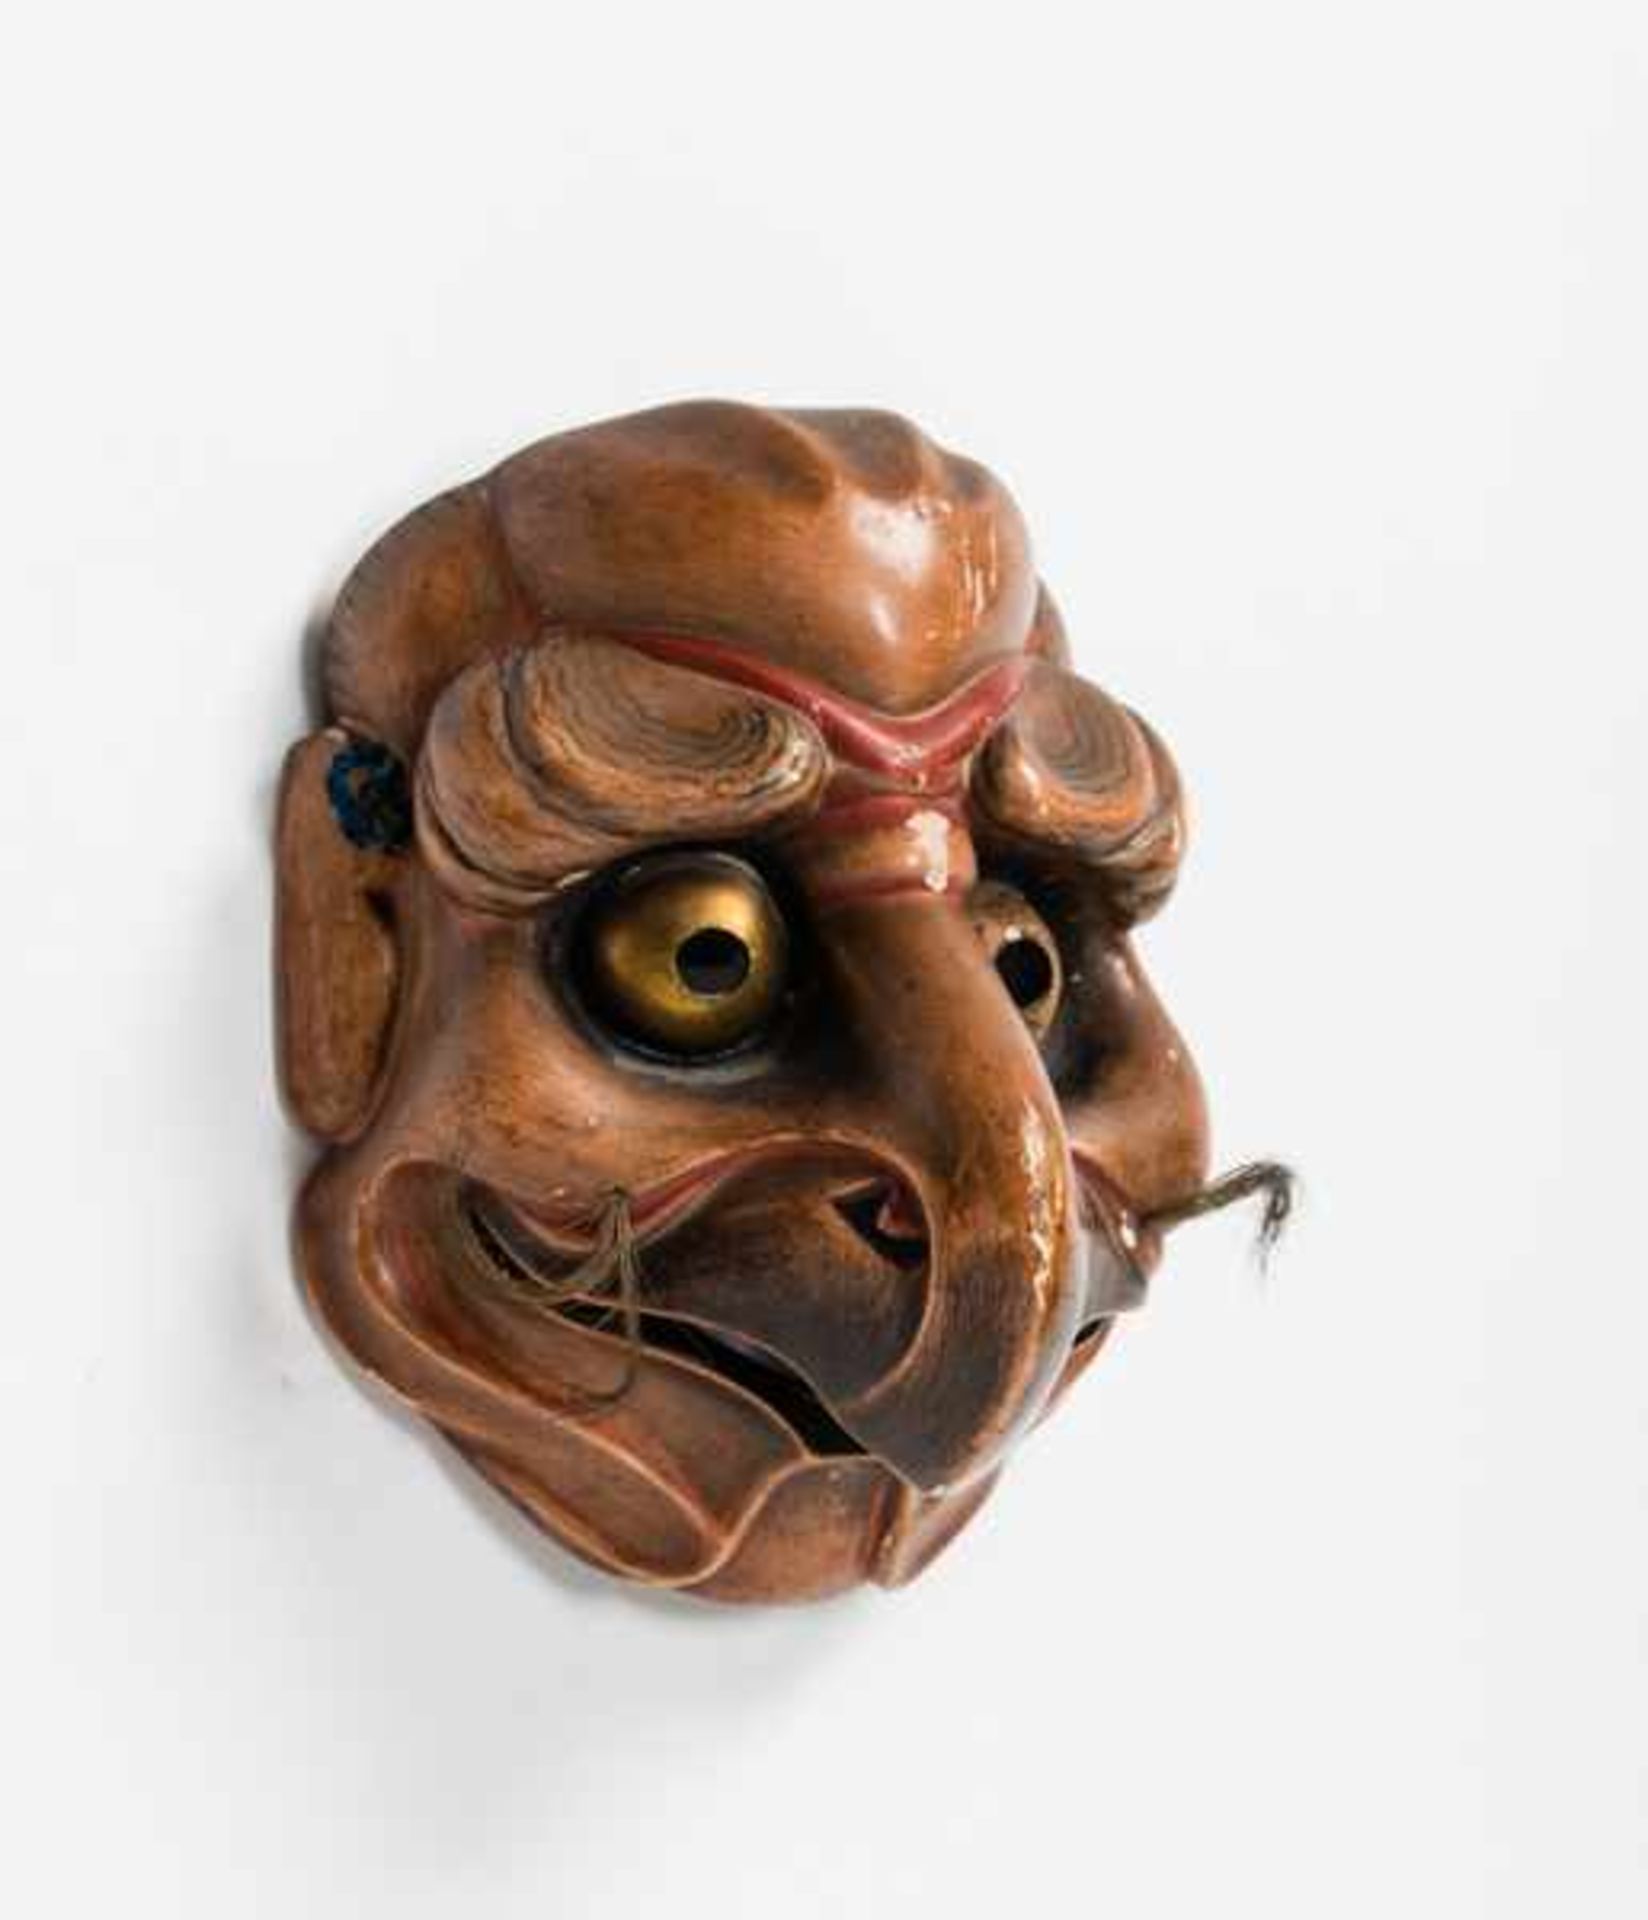 A KYOGEN MASK OF TOBI (BLACK KITE) Wood, gesso, pigments and animal hair. Japan, Edo period 17th – - Image 3 of 4